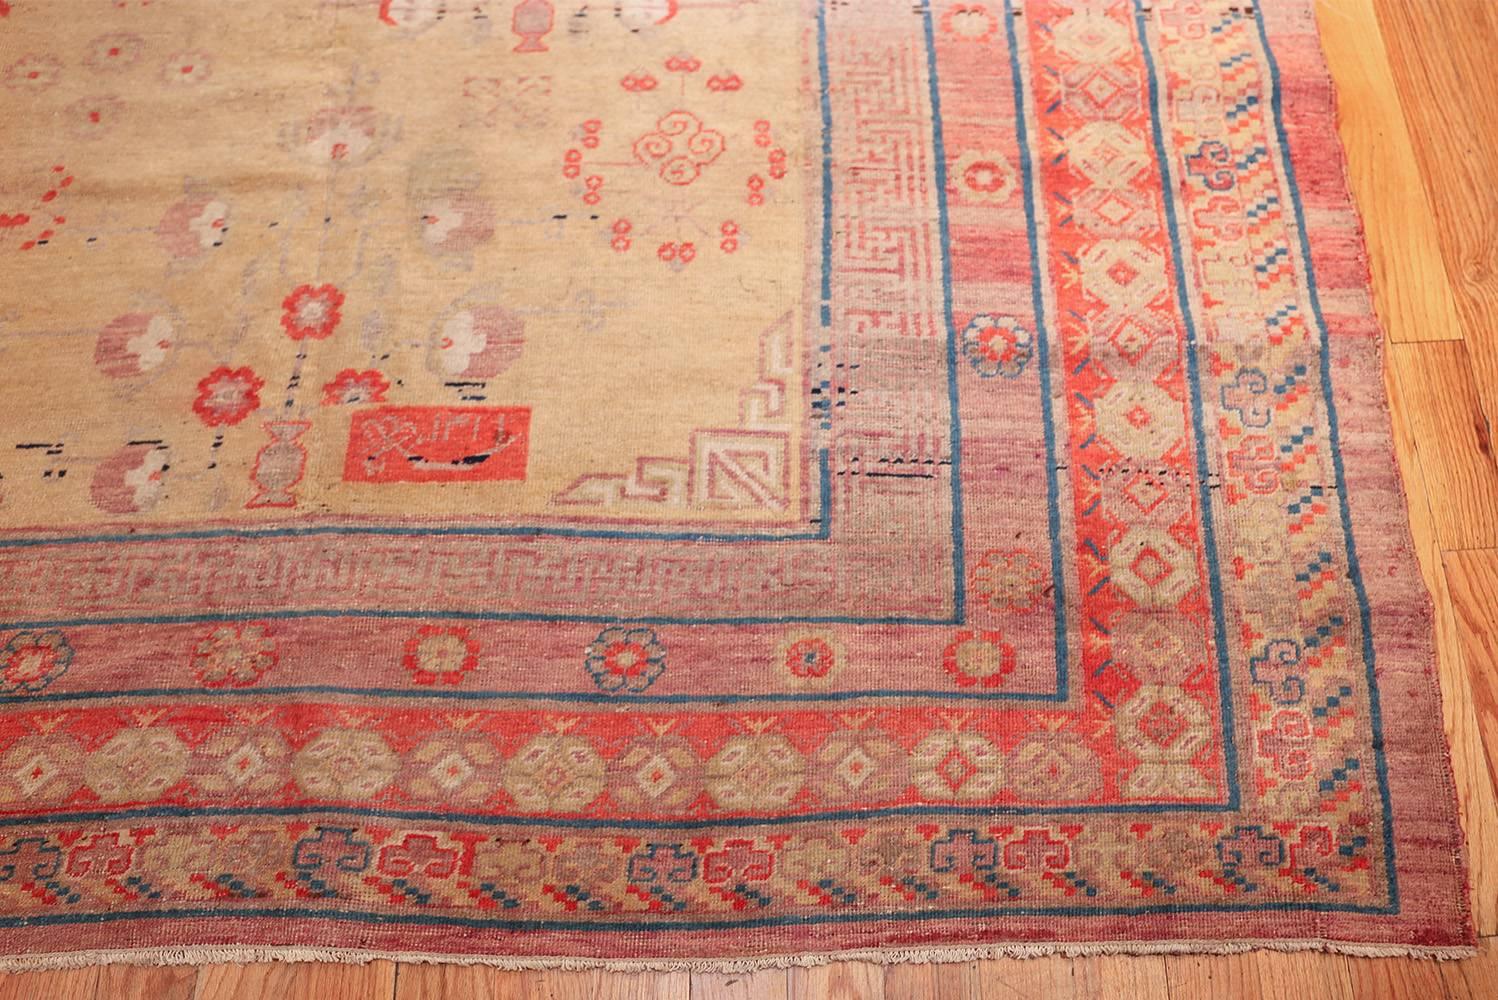 Breathtakingly beautiful and quite rare antique oversize Samarkand pomegranate design Khotan rug, country of origin: East Turkestan, date circa early-19th century. Size: 11 ft. 3 in x 19 ft. 6 in (3.43 m x 5.94 m).